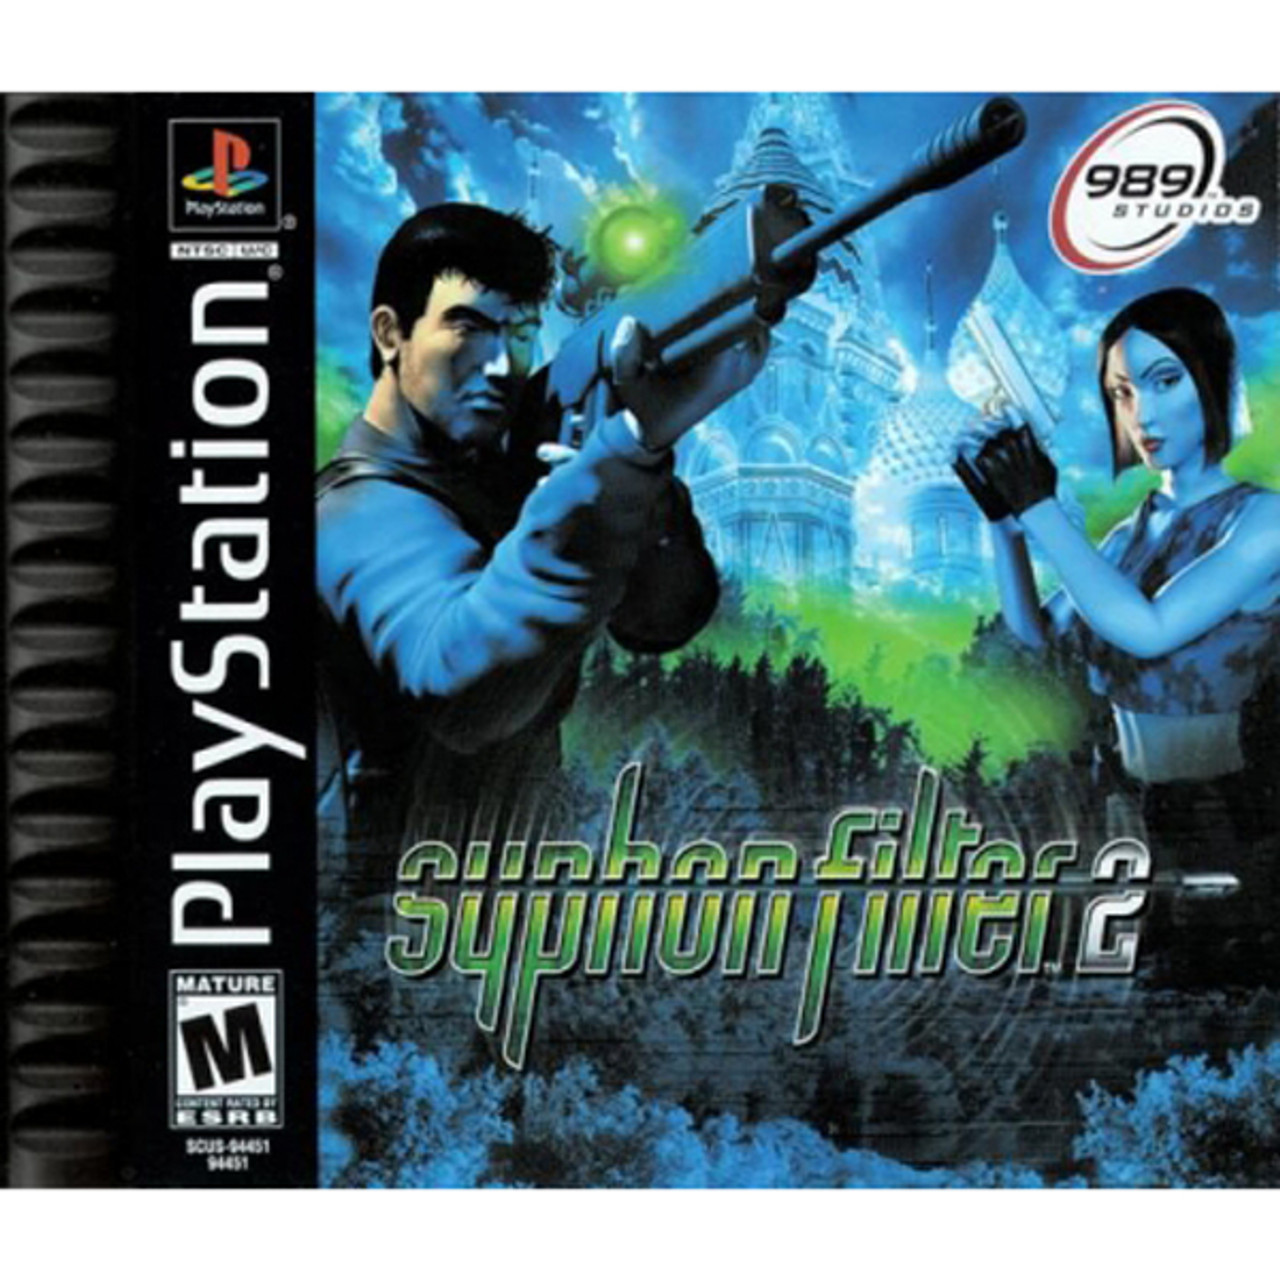 Syphon Filter Video Game.playstation 